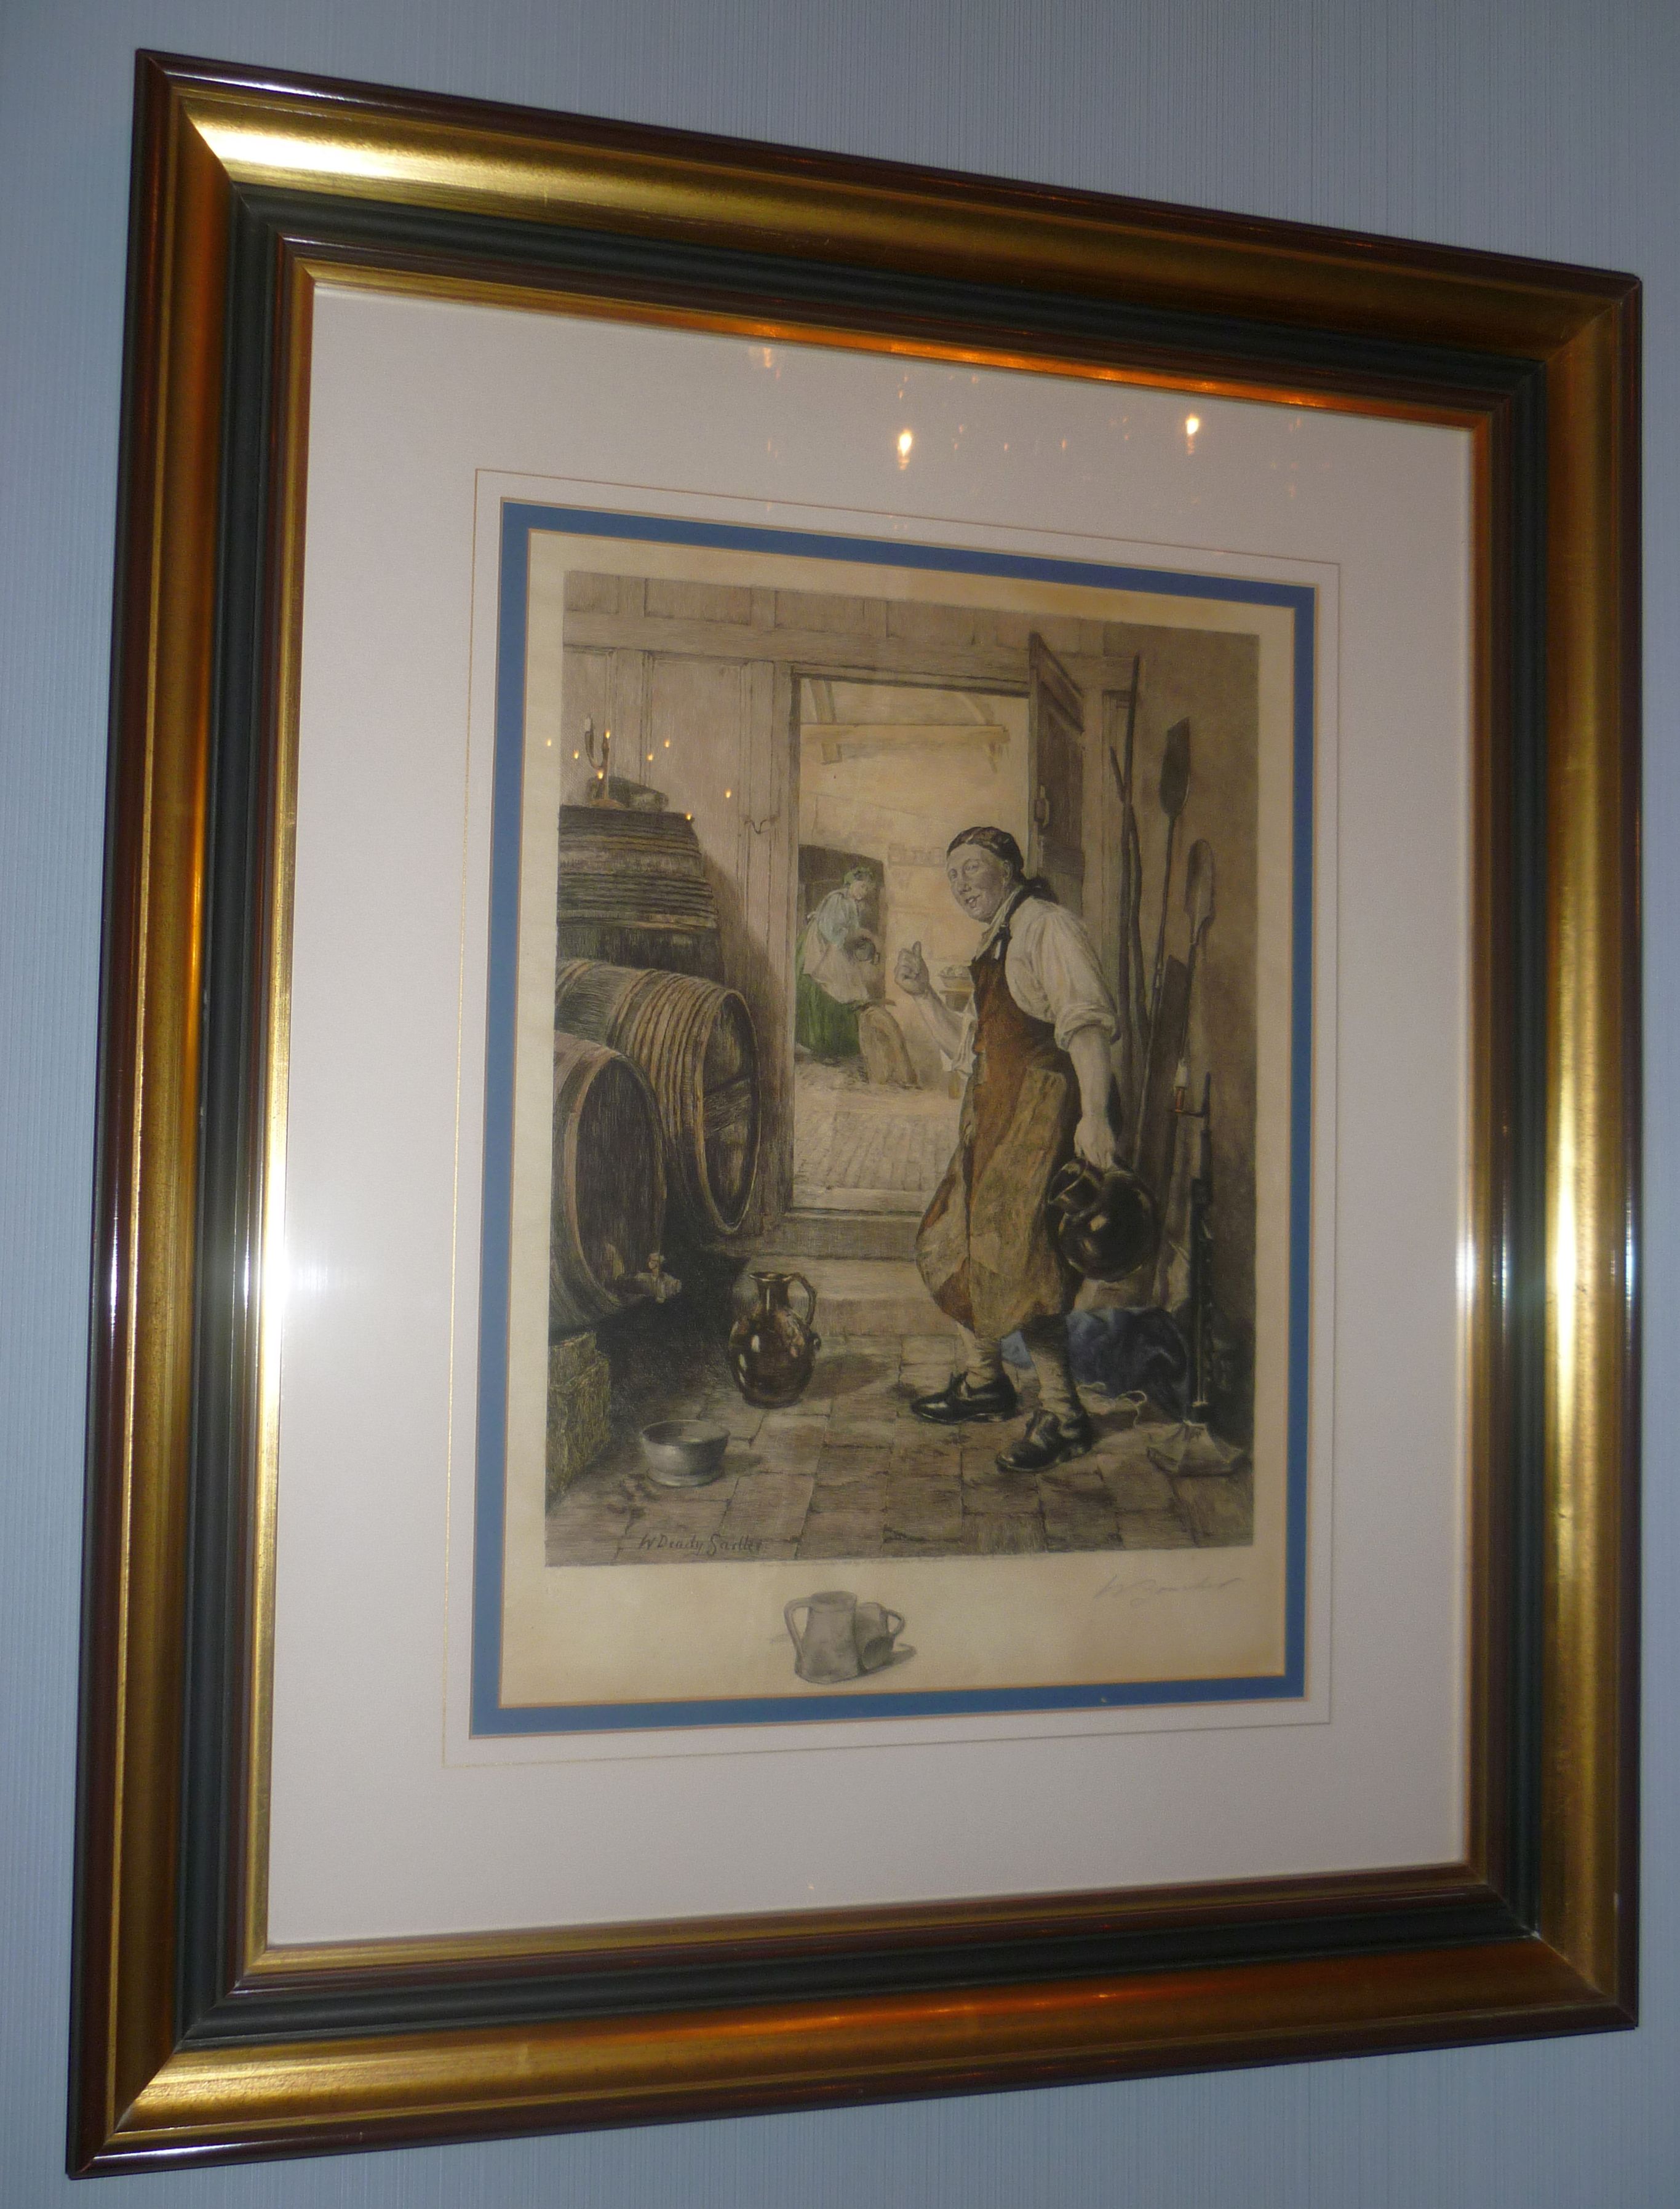 *Dendy Sadler by Boucher Coloured Engraving Signed by Both Artists Butler with glass of red wine and - Image 2 of 2